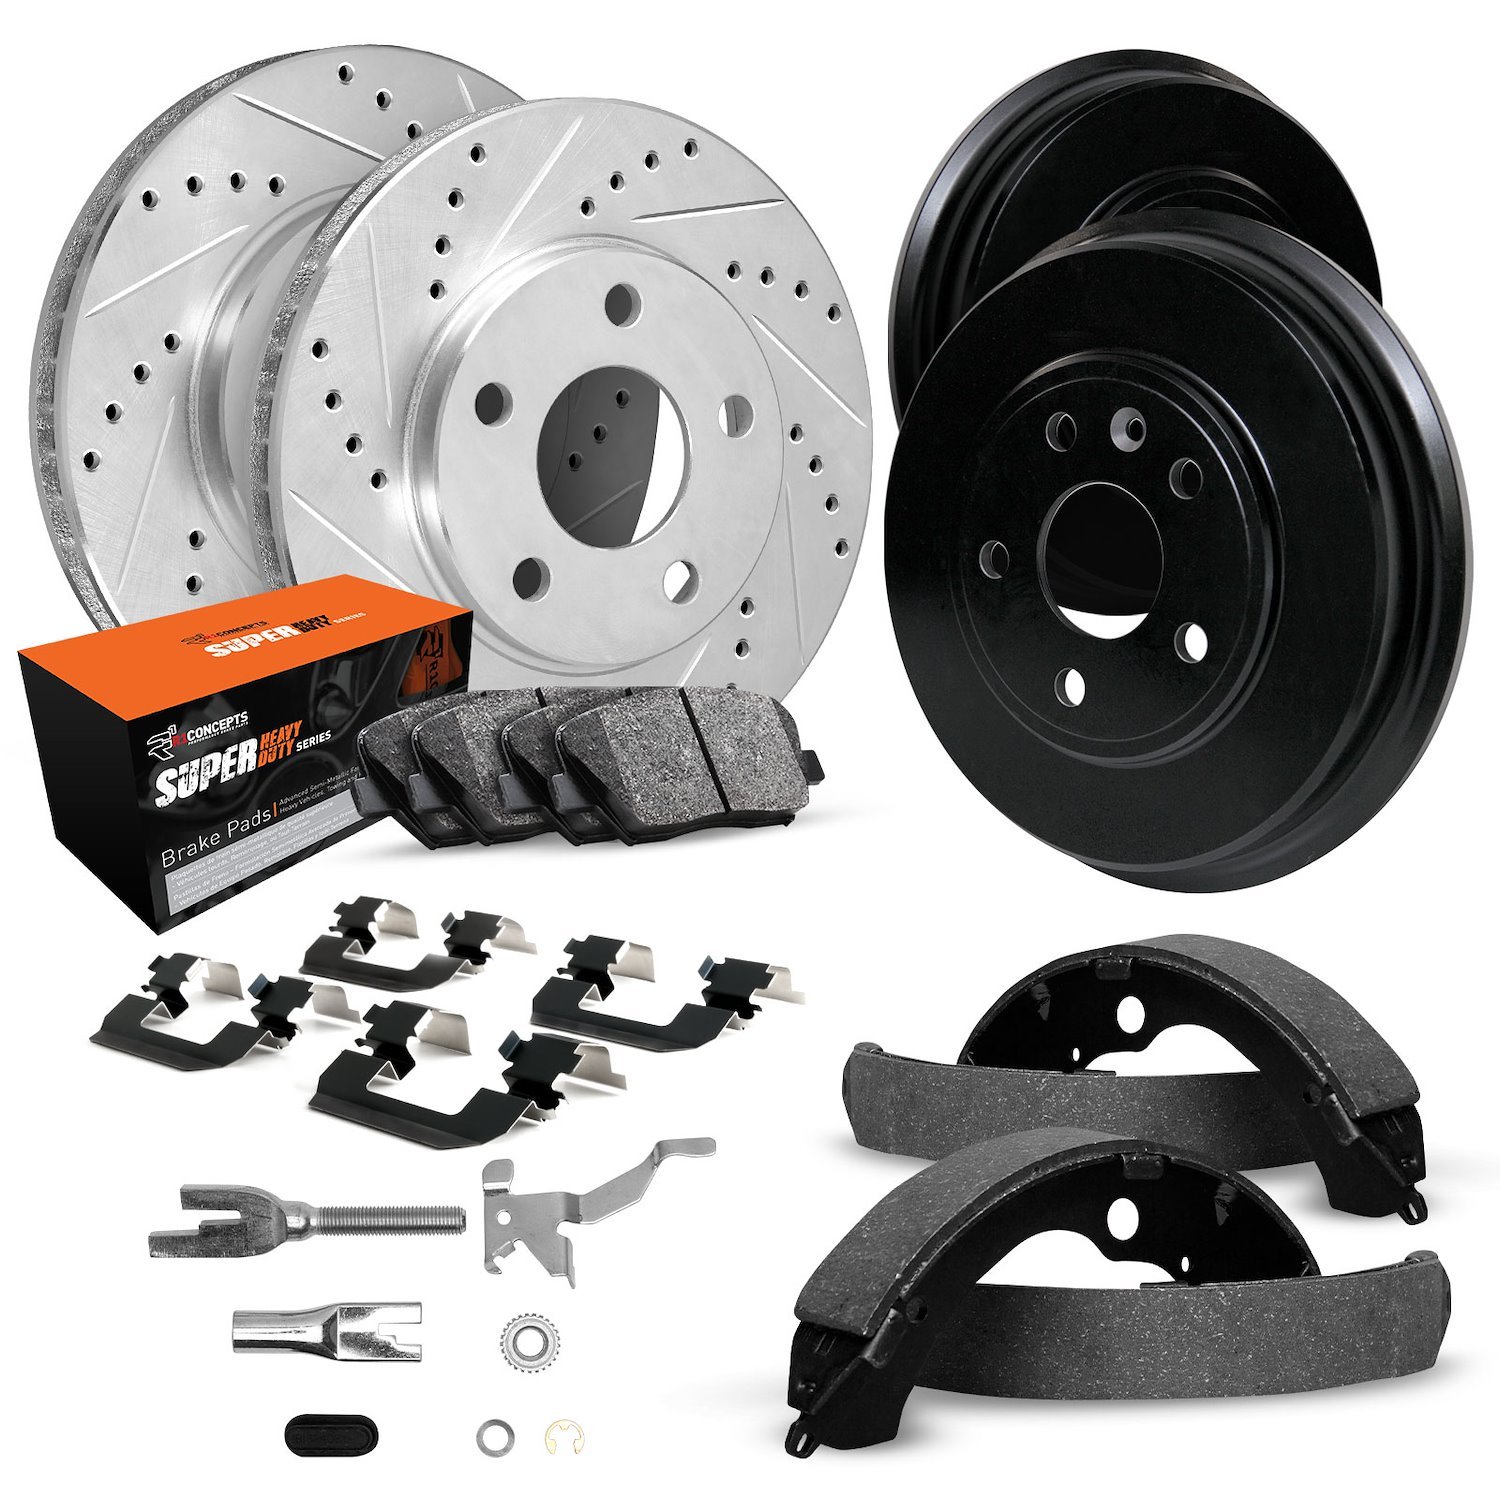 E-Line Drilled/Slotted Silver Rotor & Drum Set w/Super-Duty Pads, Shoes/Hardware/Adjusters, Fits Select Lexus/Toyota/Scion